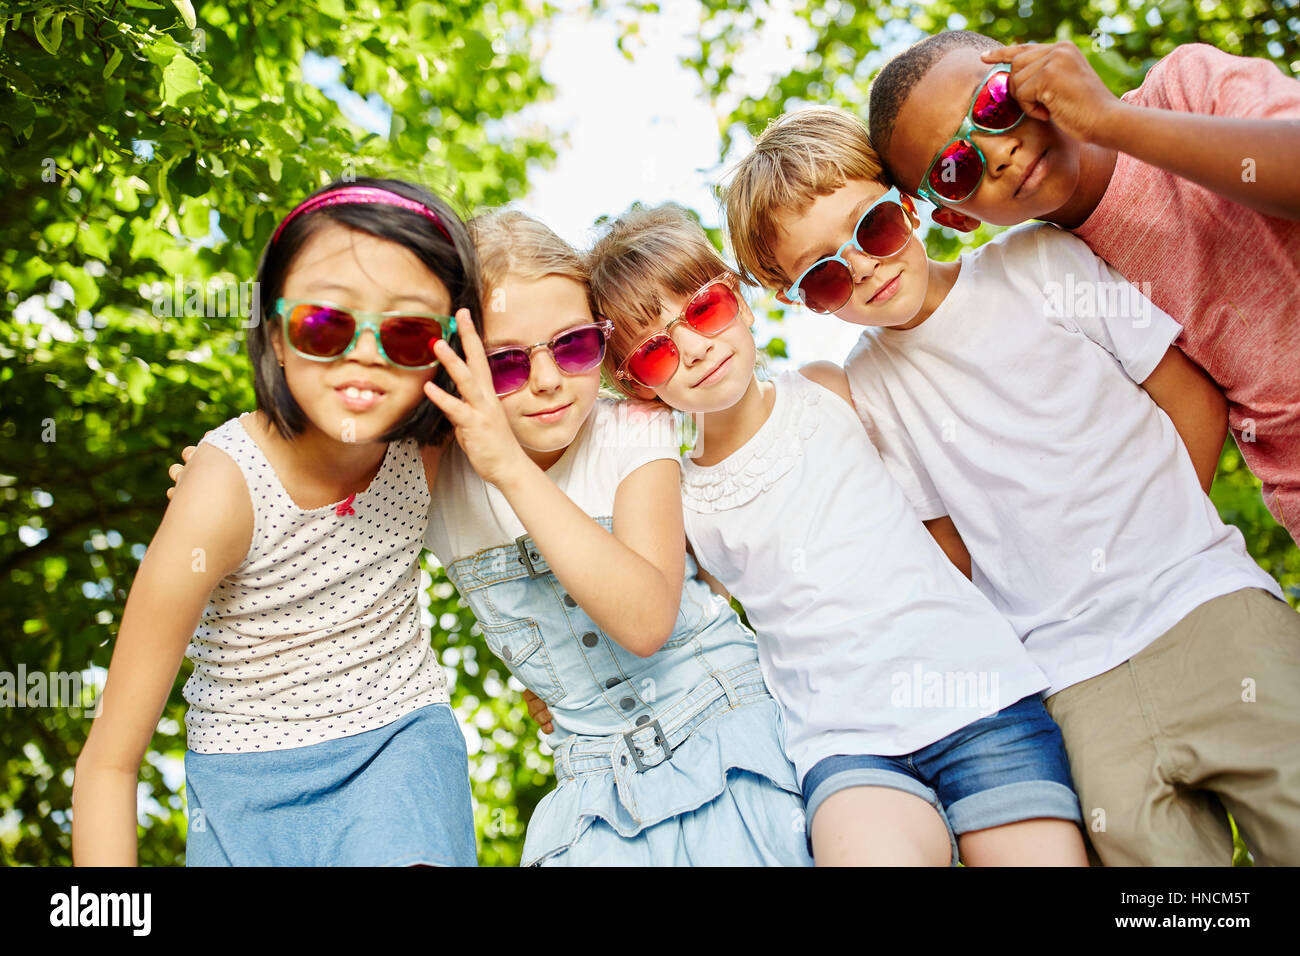 Children as friends in cool interracial team together at the park in summer Stock Photo